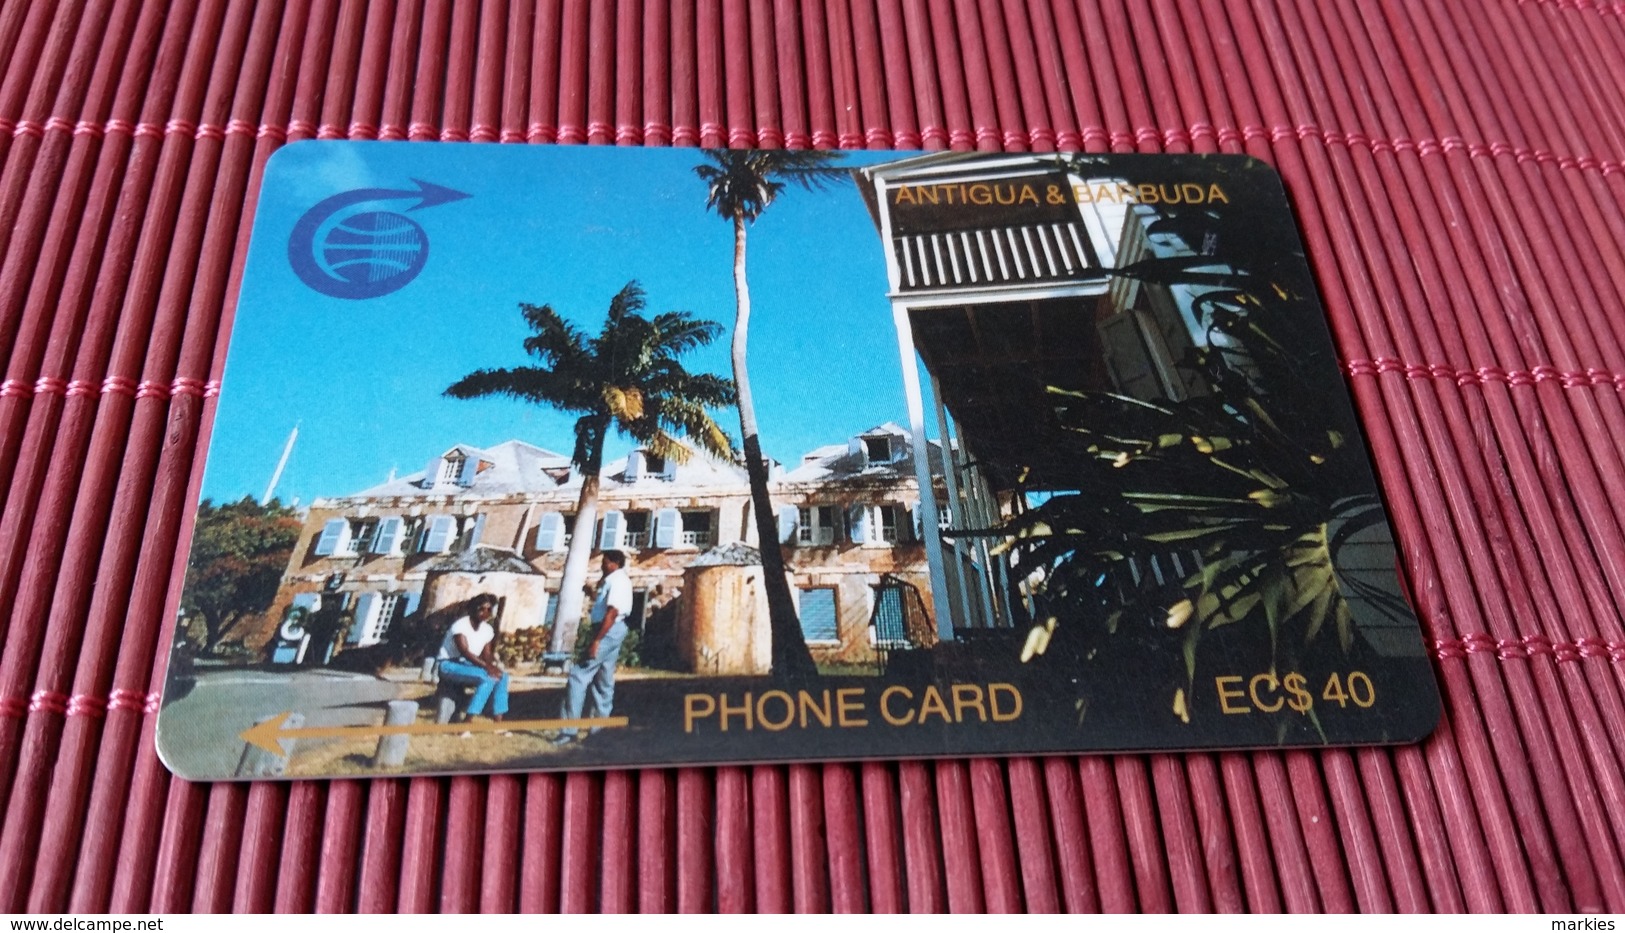 Antiga & Barbuda 40 $ Phonecard Number 3CATD  Used Not Perfect Some Scratches Of Damage Of Use See Scan Rare - Antigua Et Barbuda